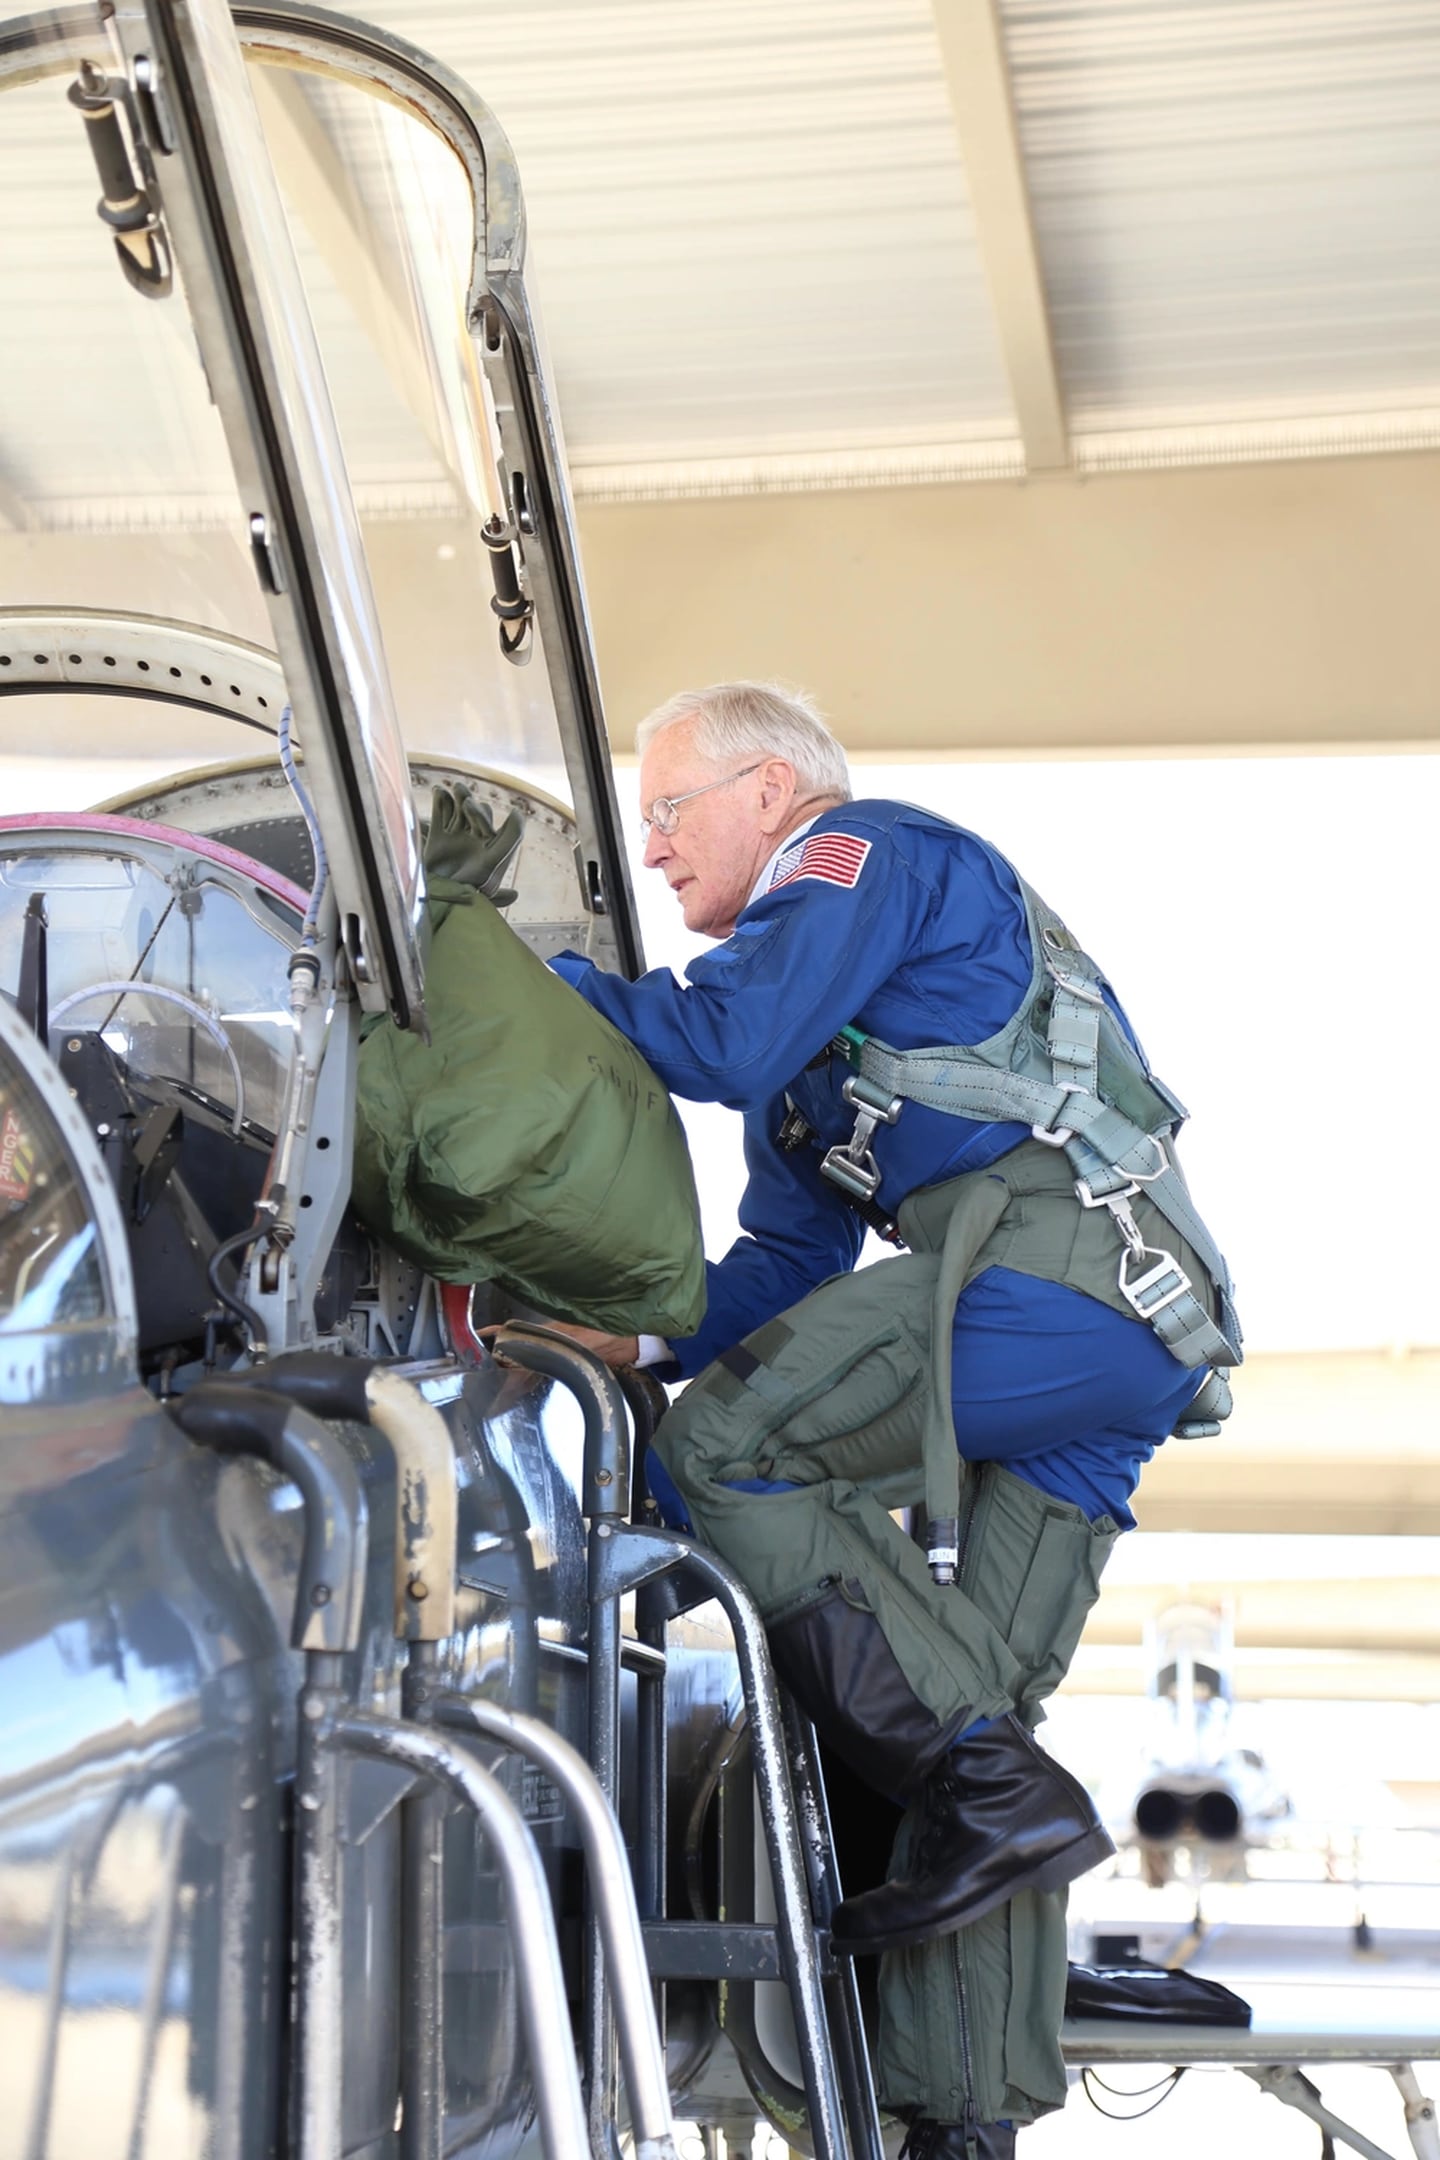 Retired Air Force Brig. Gen. Charlie Duke, Apollo 16 astronaut and 10th person to walk on the moon, climbs into a 560th Flying Training Squadron T-38 Talon before an incentive flight Feb. 19, 2015, at Joint Base San Antonio-Randolph, Texas. (Airman 1st Class Alexandria Slade/Air Force)